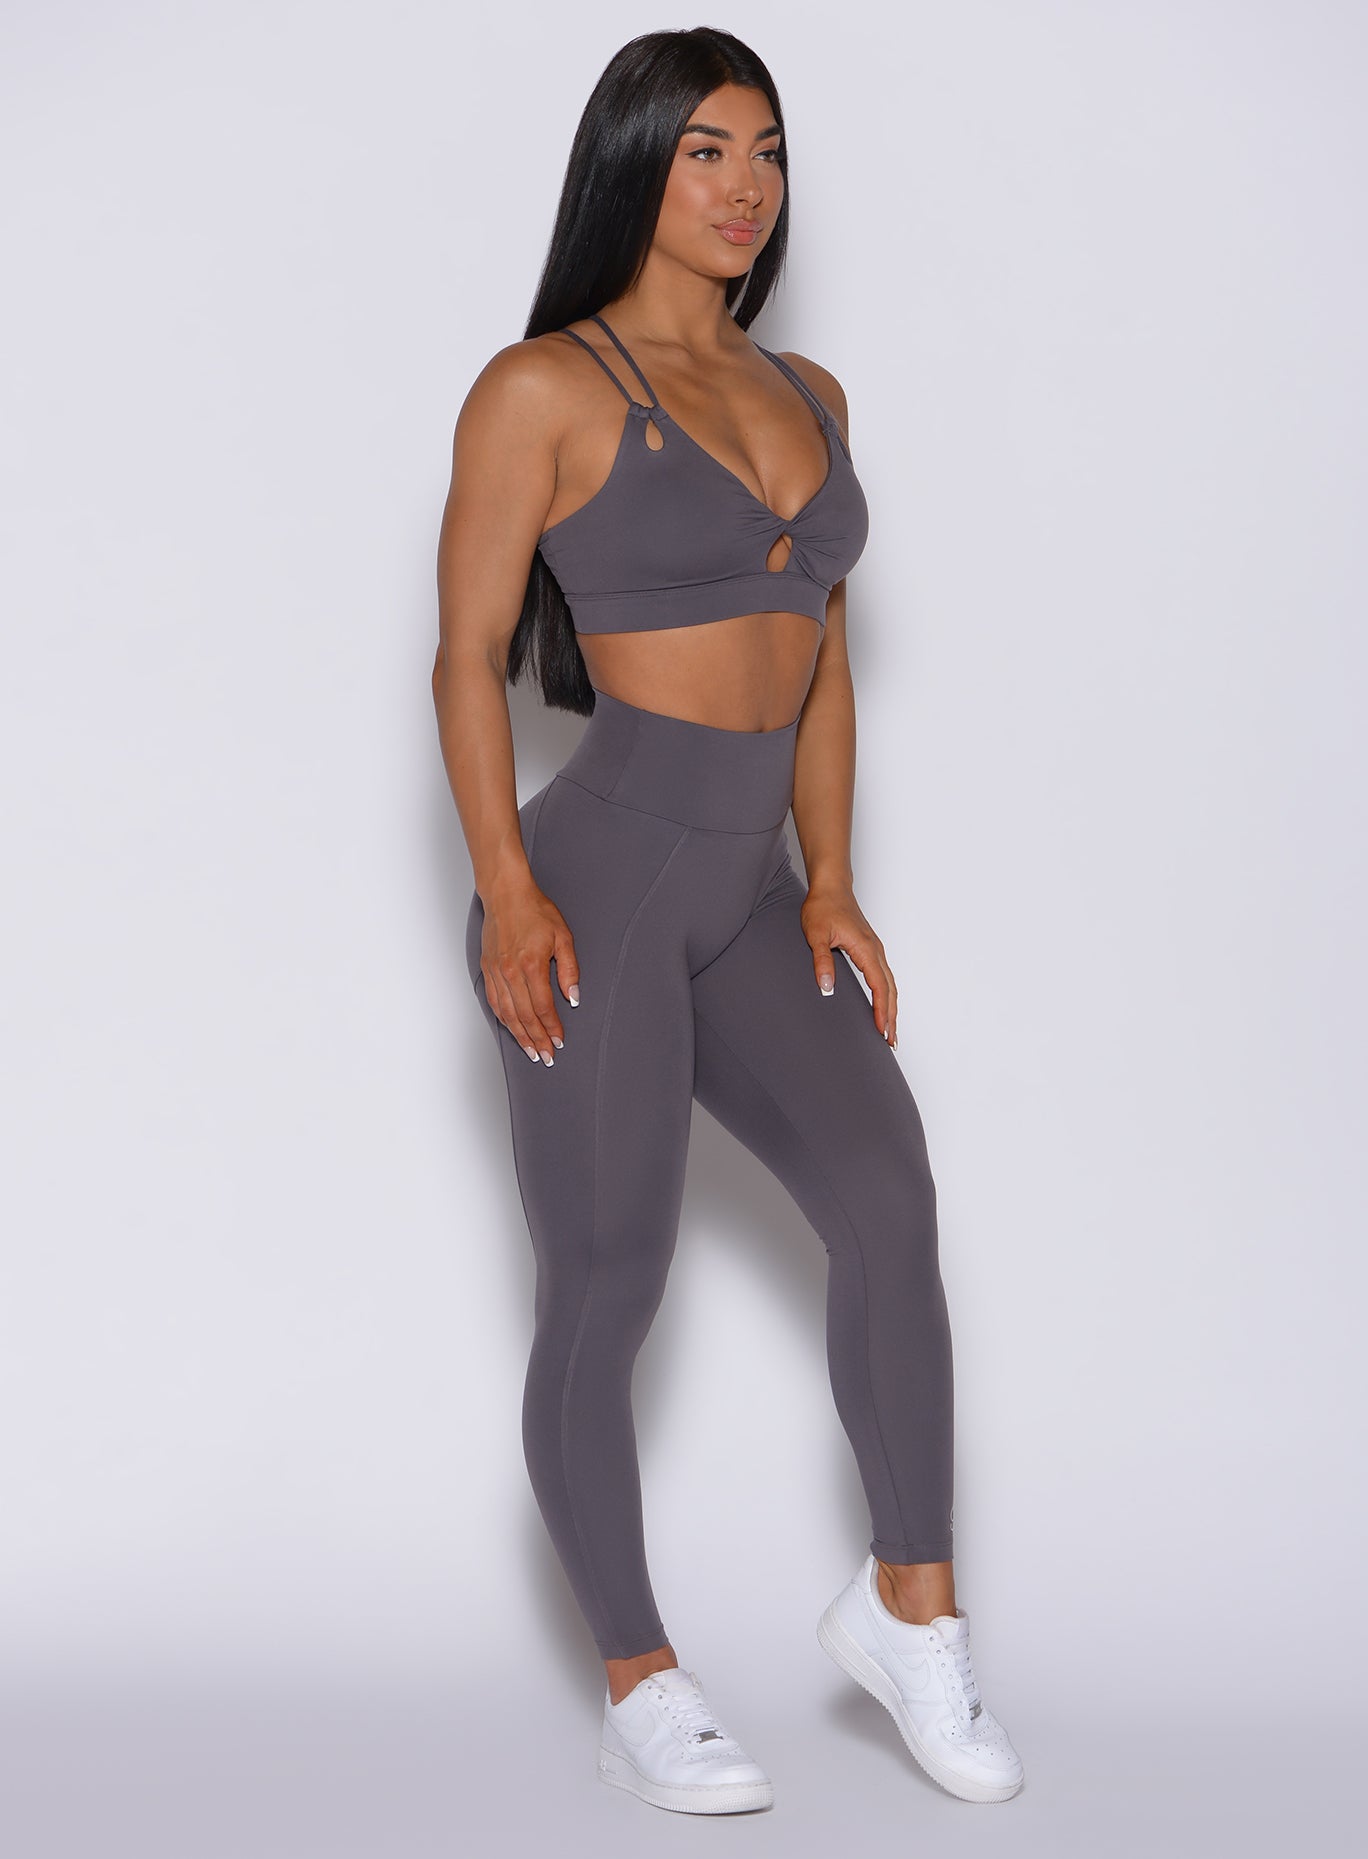 Right side profile view of a model angled slightly to her right wearing our new and enhanced shape leggings in gray smoke color and a matching bra